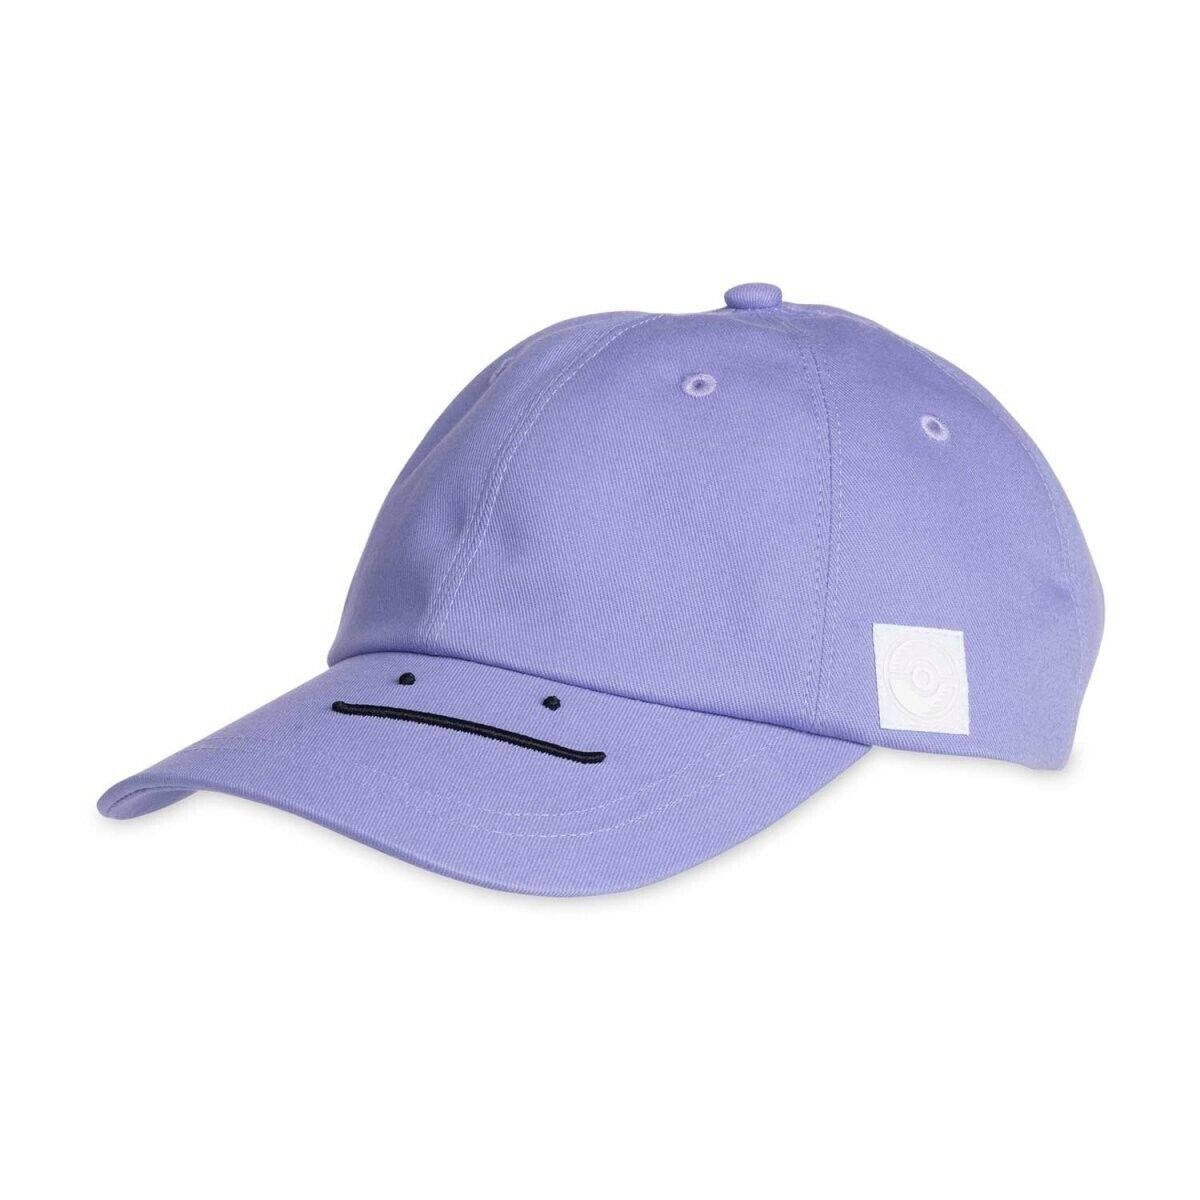 New Simply Ditto Official Pokemon Center Lounge Purple Hat SOLD OUT NIB USA